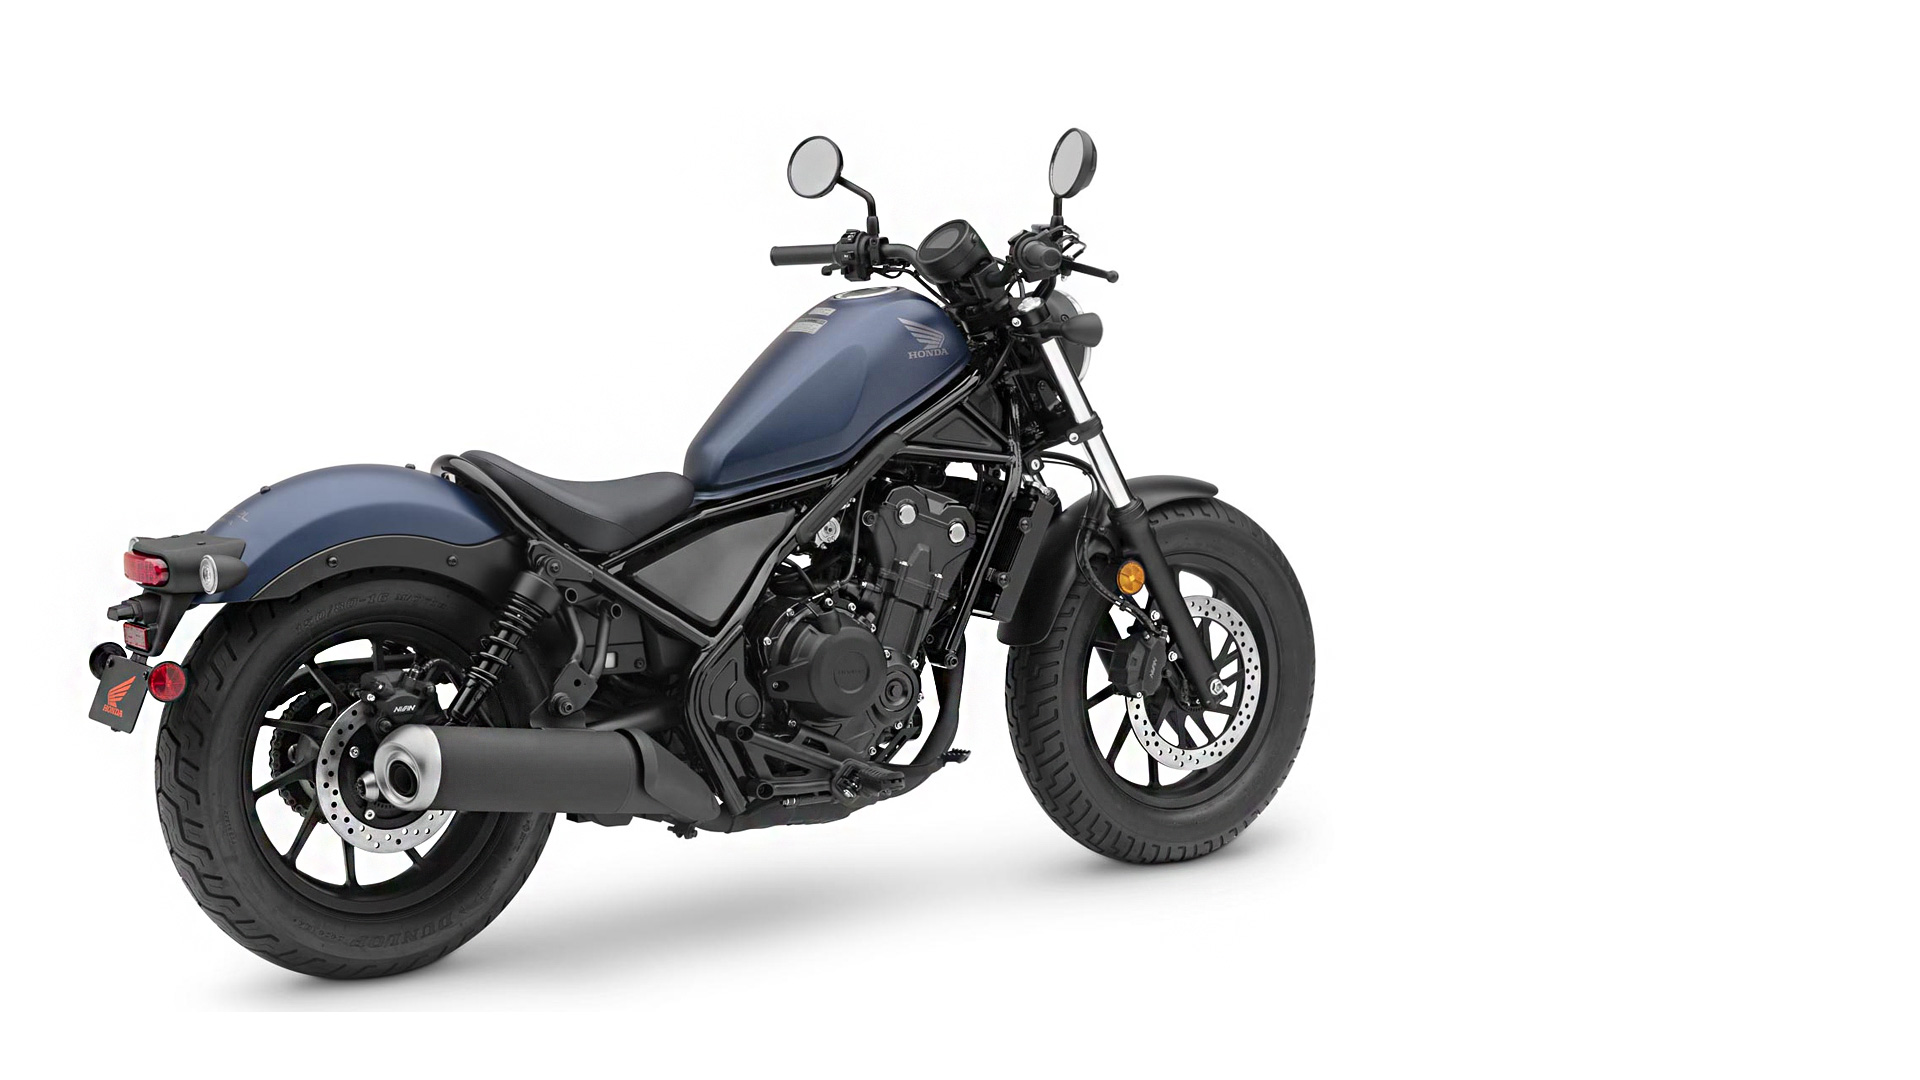 Honda Rebel 500 Price Mileage Reviews Specification Gallery Overdrive